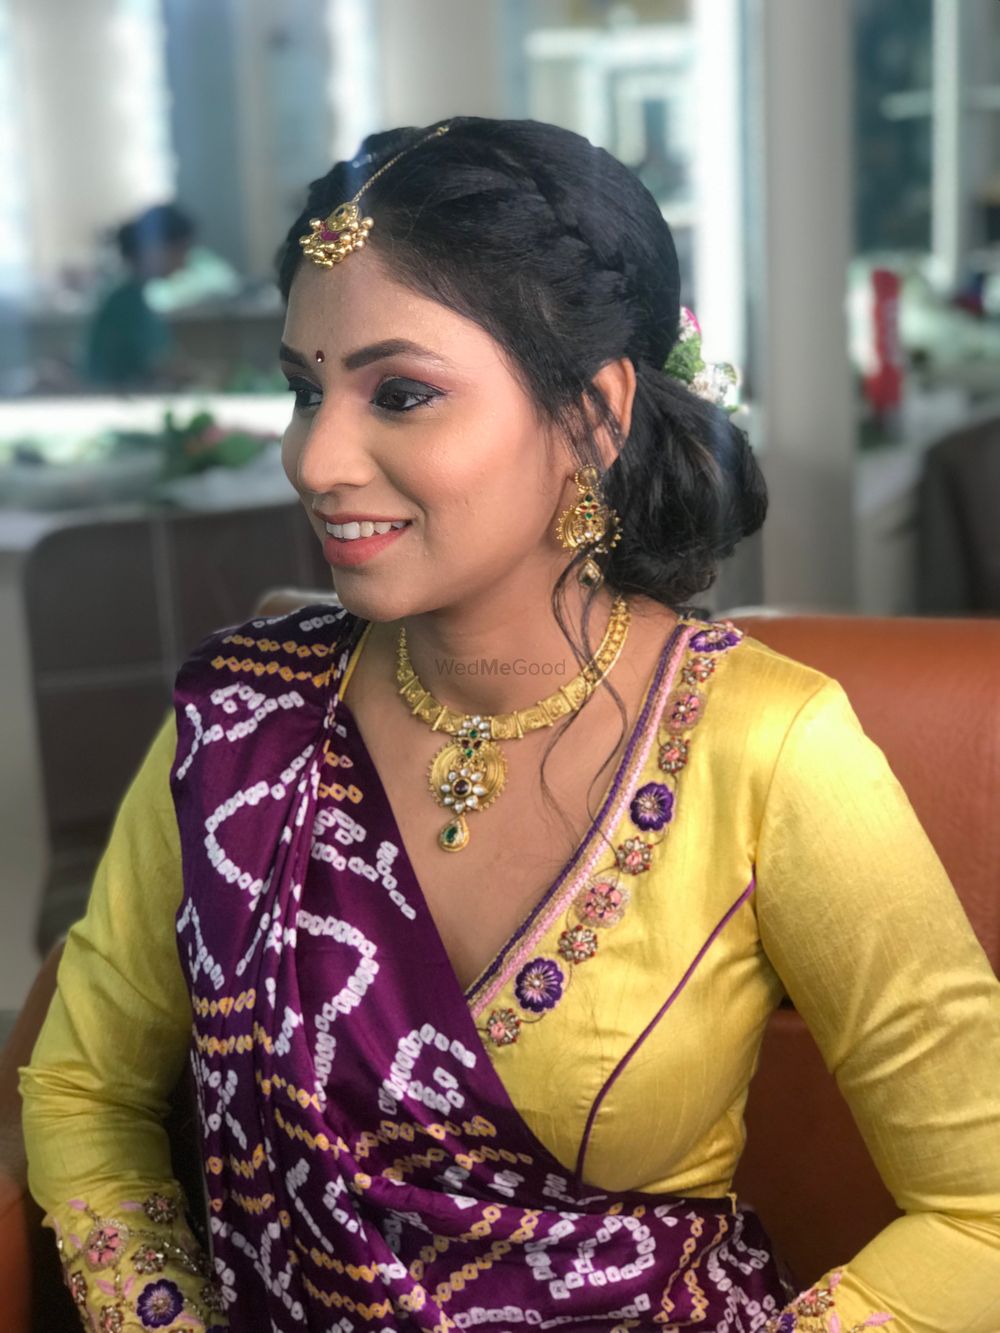 Photo From Reception Brides  - By Riddhima Makeovers